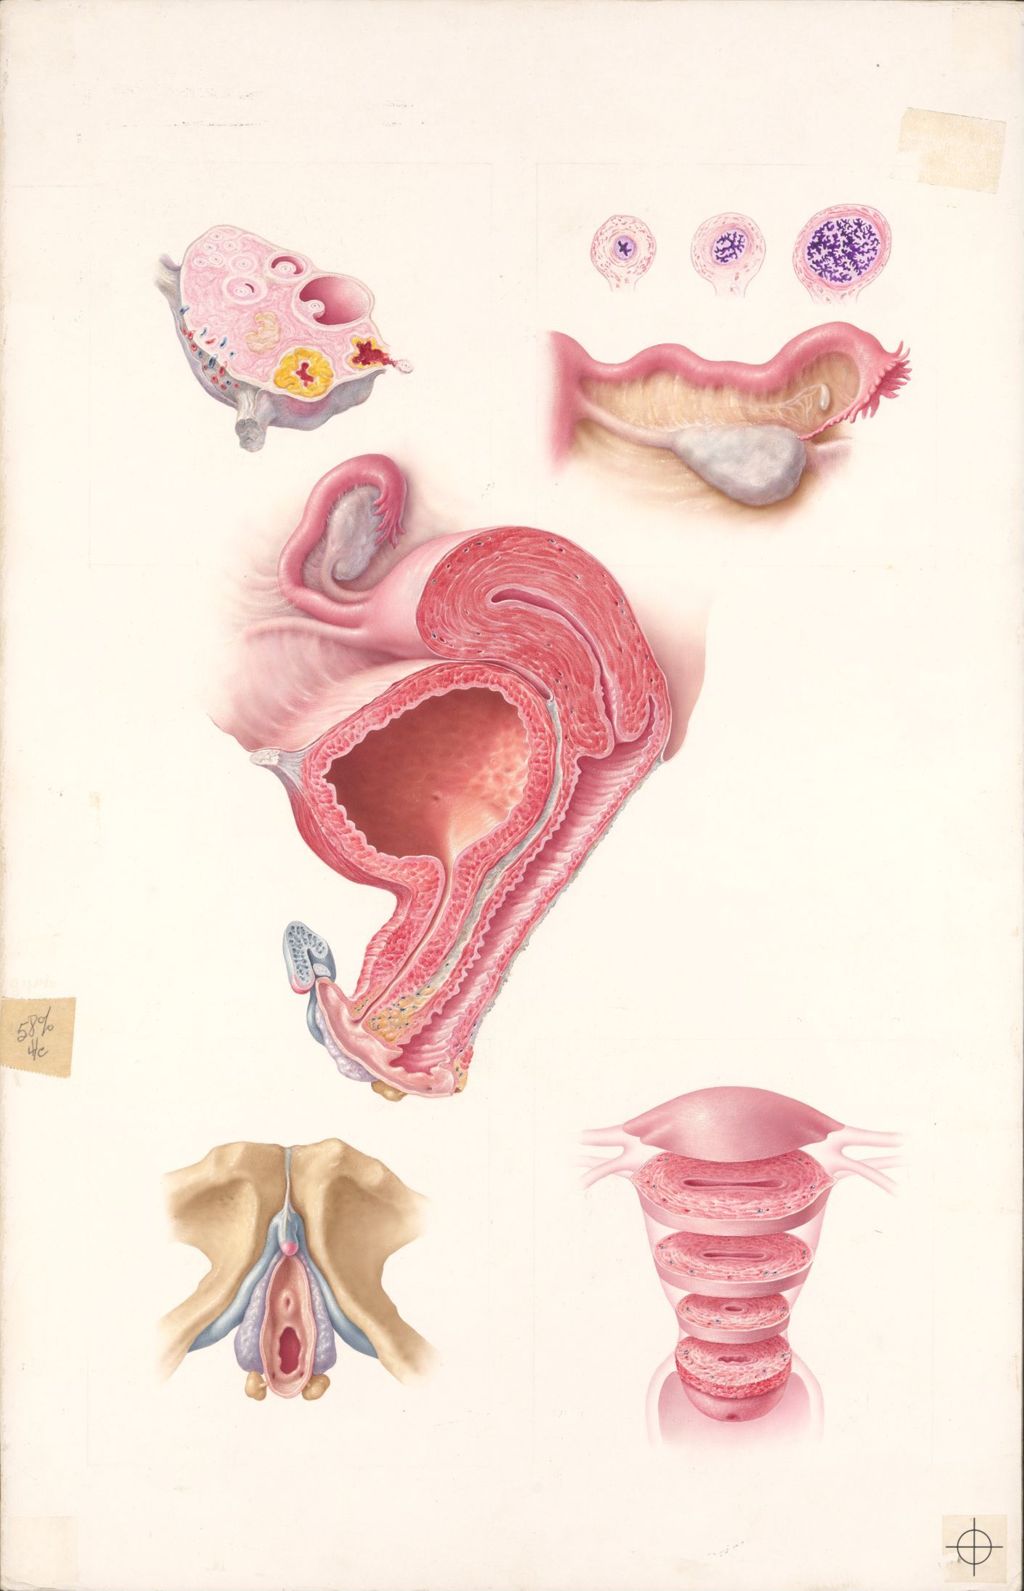 The Female Urogenital Tract, Plate II, Midsagittal Section Through the Female Pelvic Viscera, as seen from the left